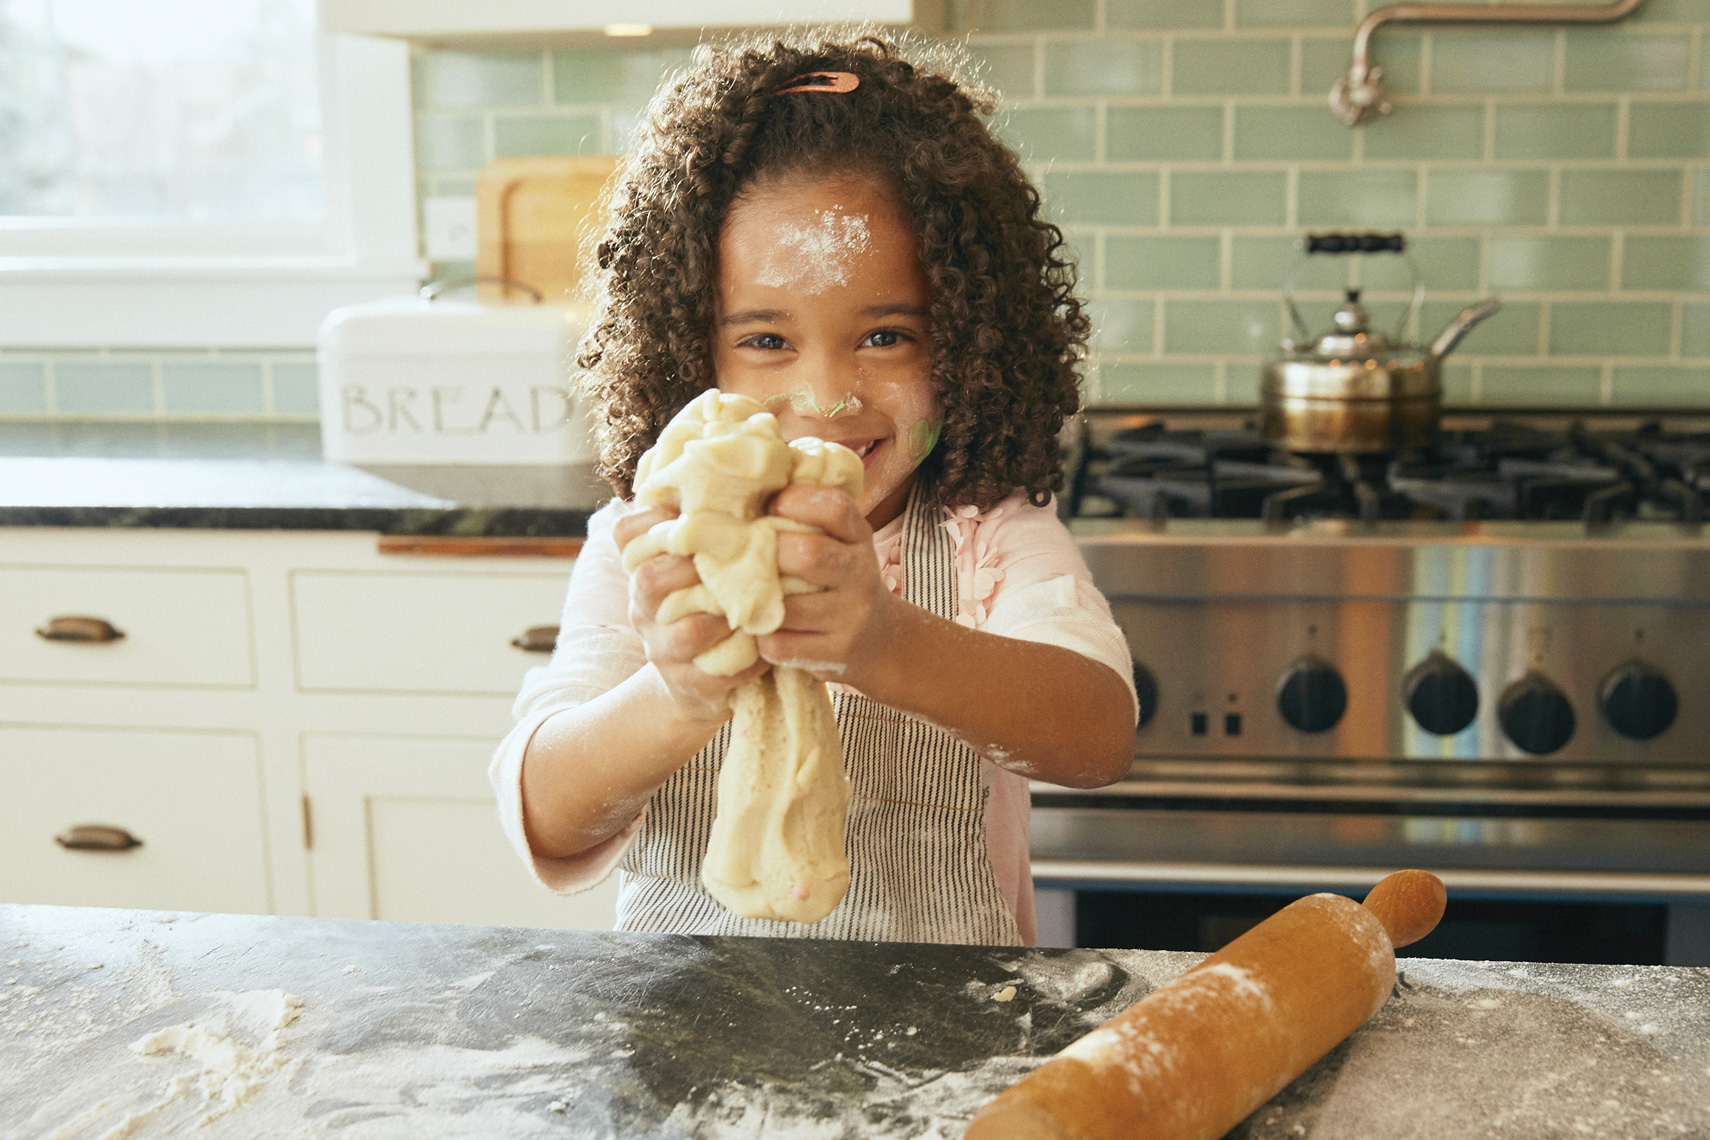 Baking with Kids || Brian Stevens  || Photography